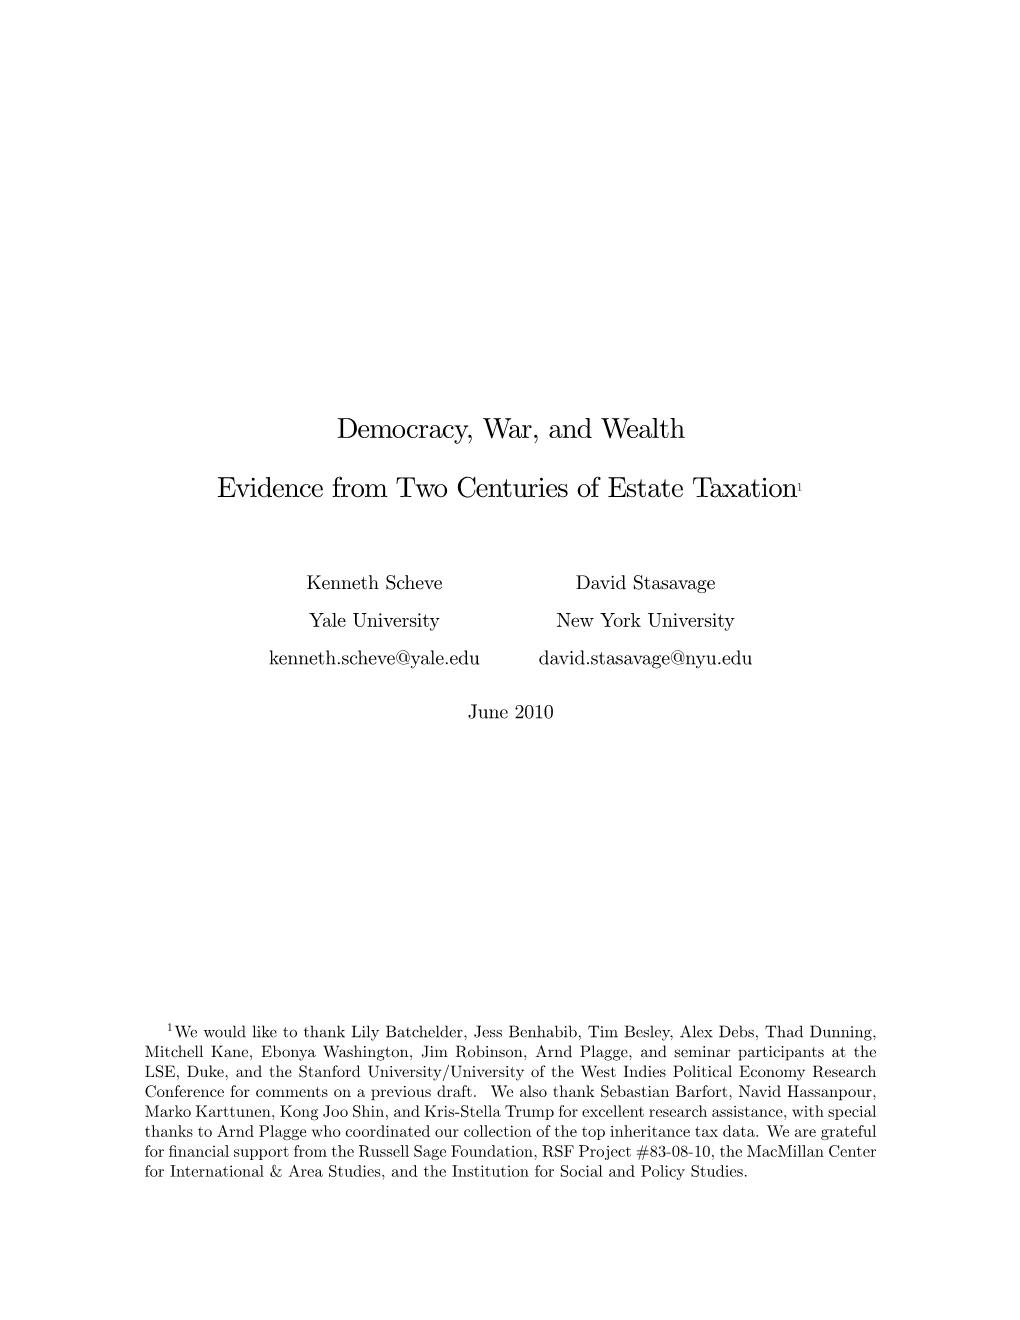 Democracy, War, and Wealth Evidence from Two Centuries of Estate Taxation1